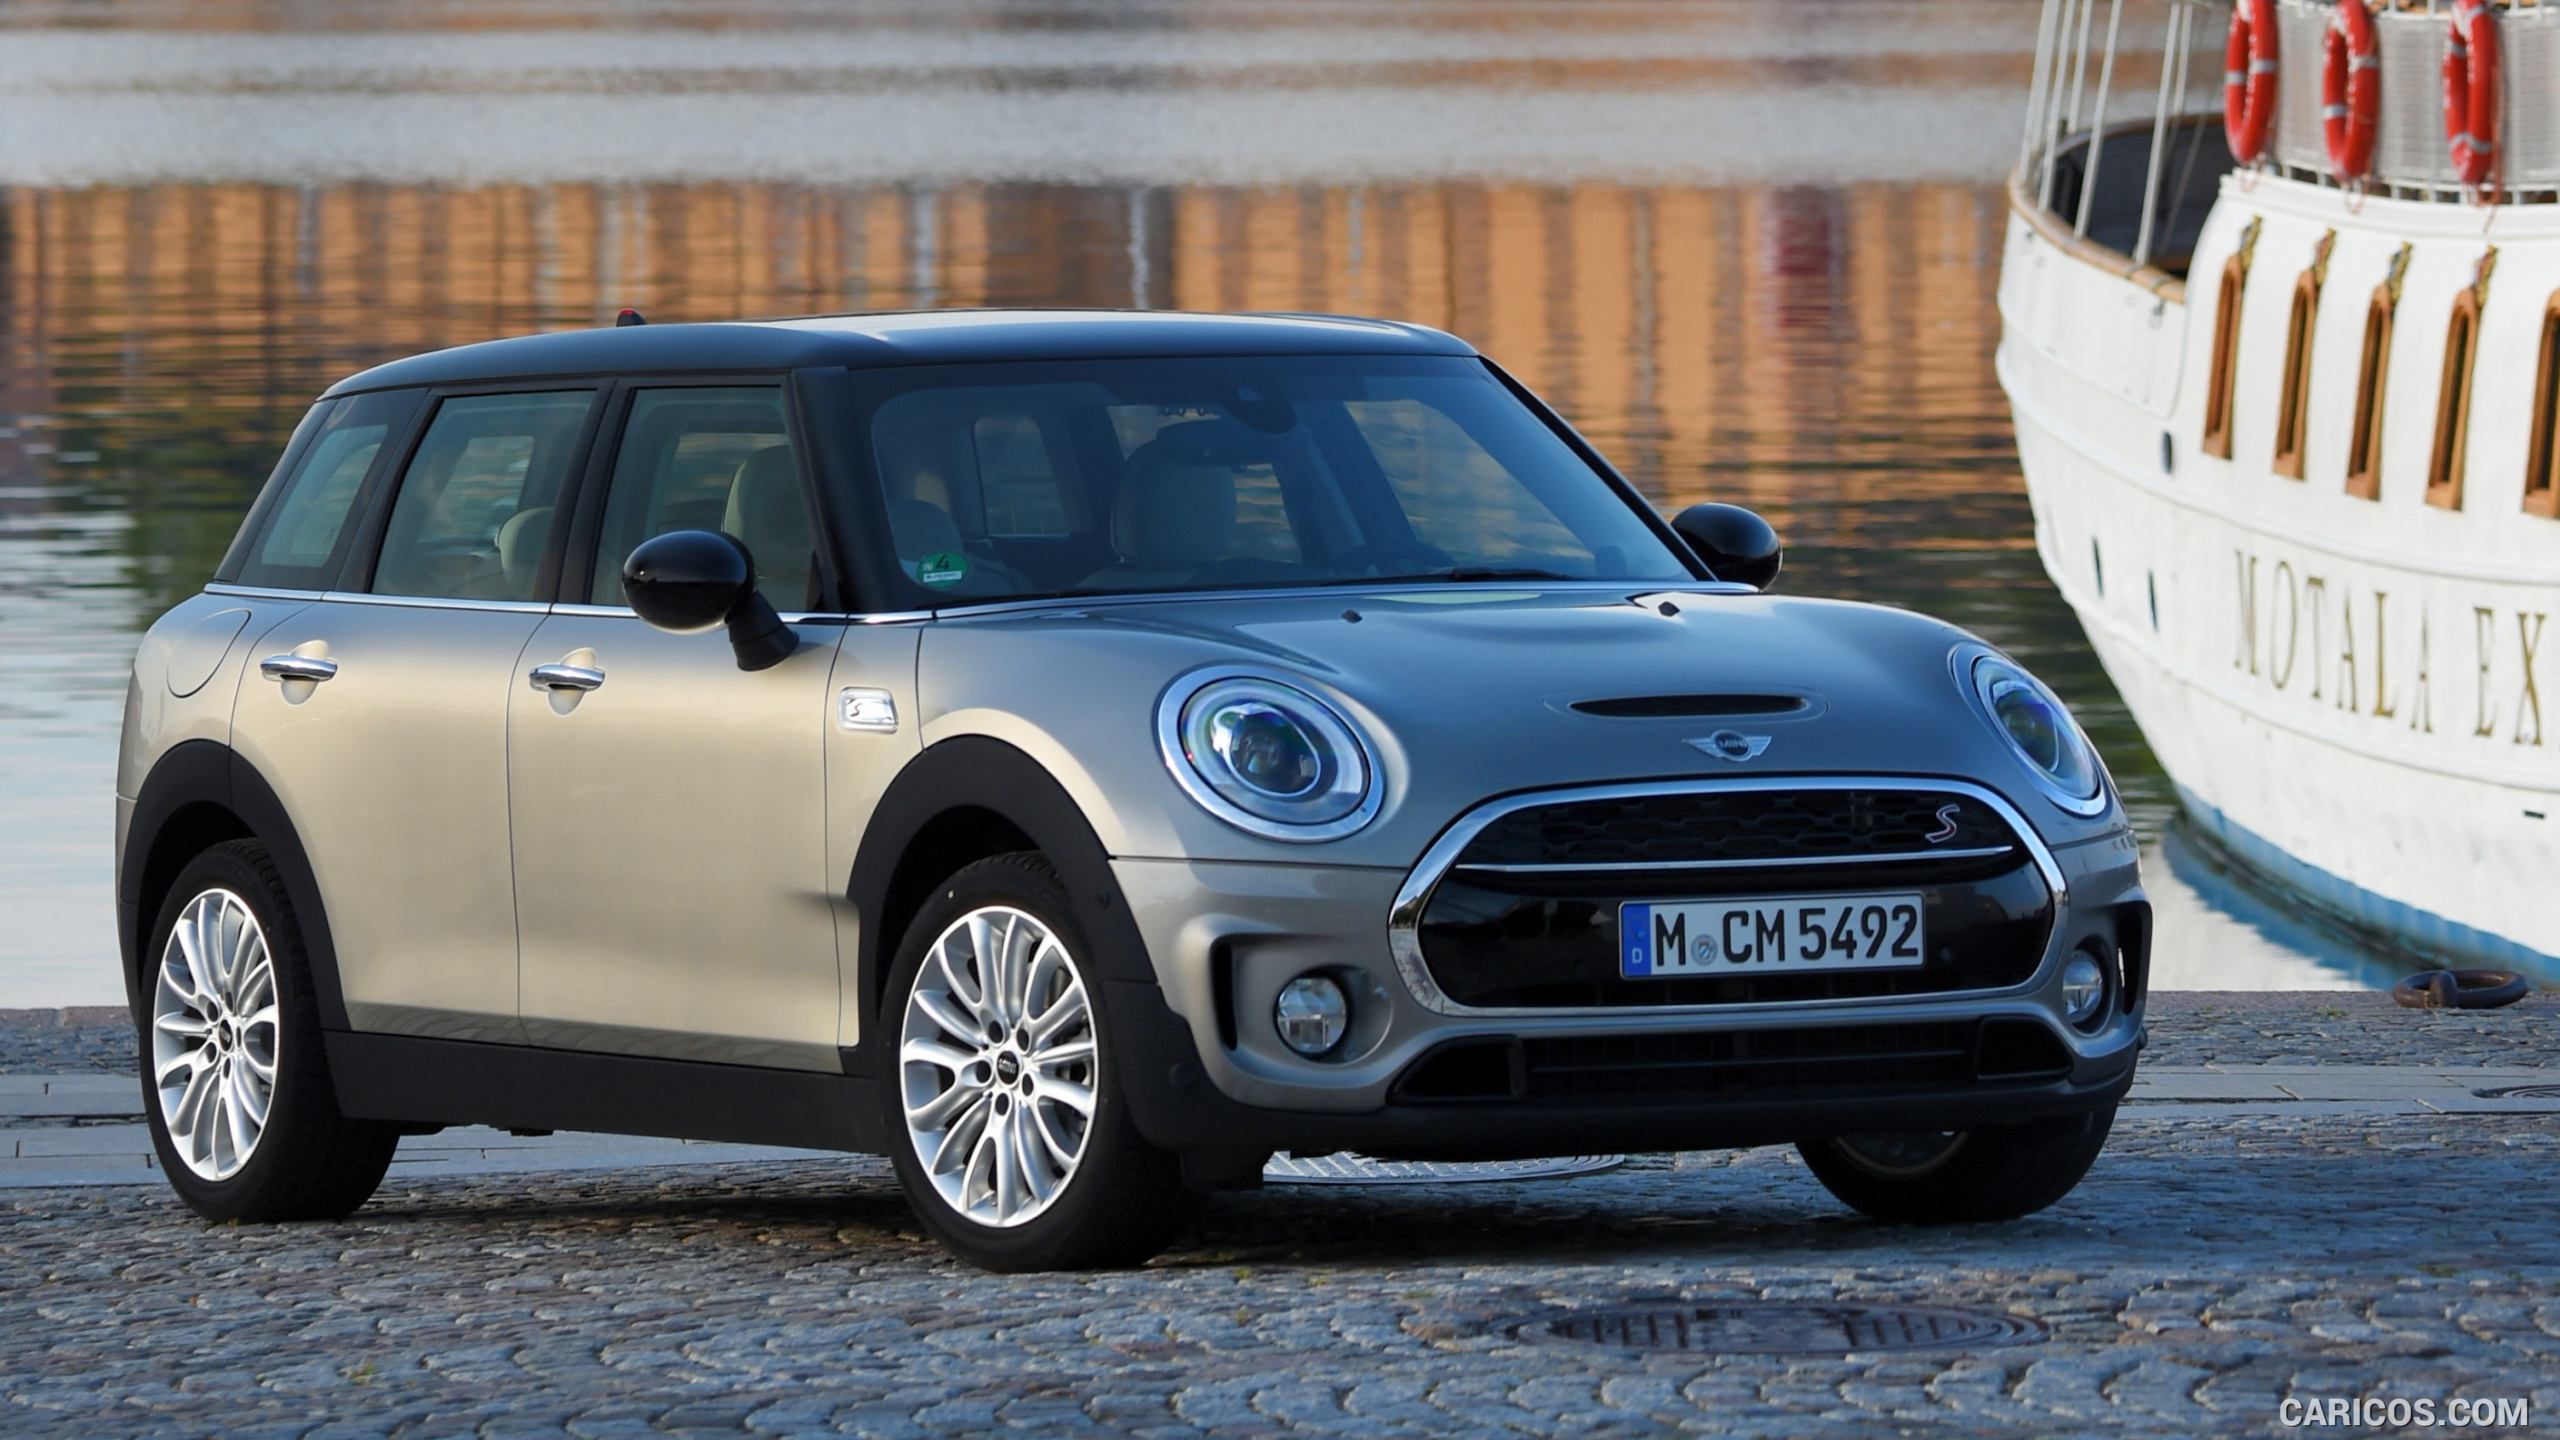 2016 MINI Cooper S Clubman in Metallic Melting Silver - Front, #167 of 380